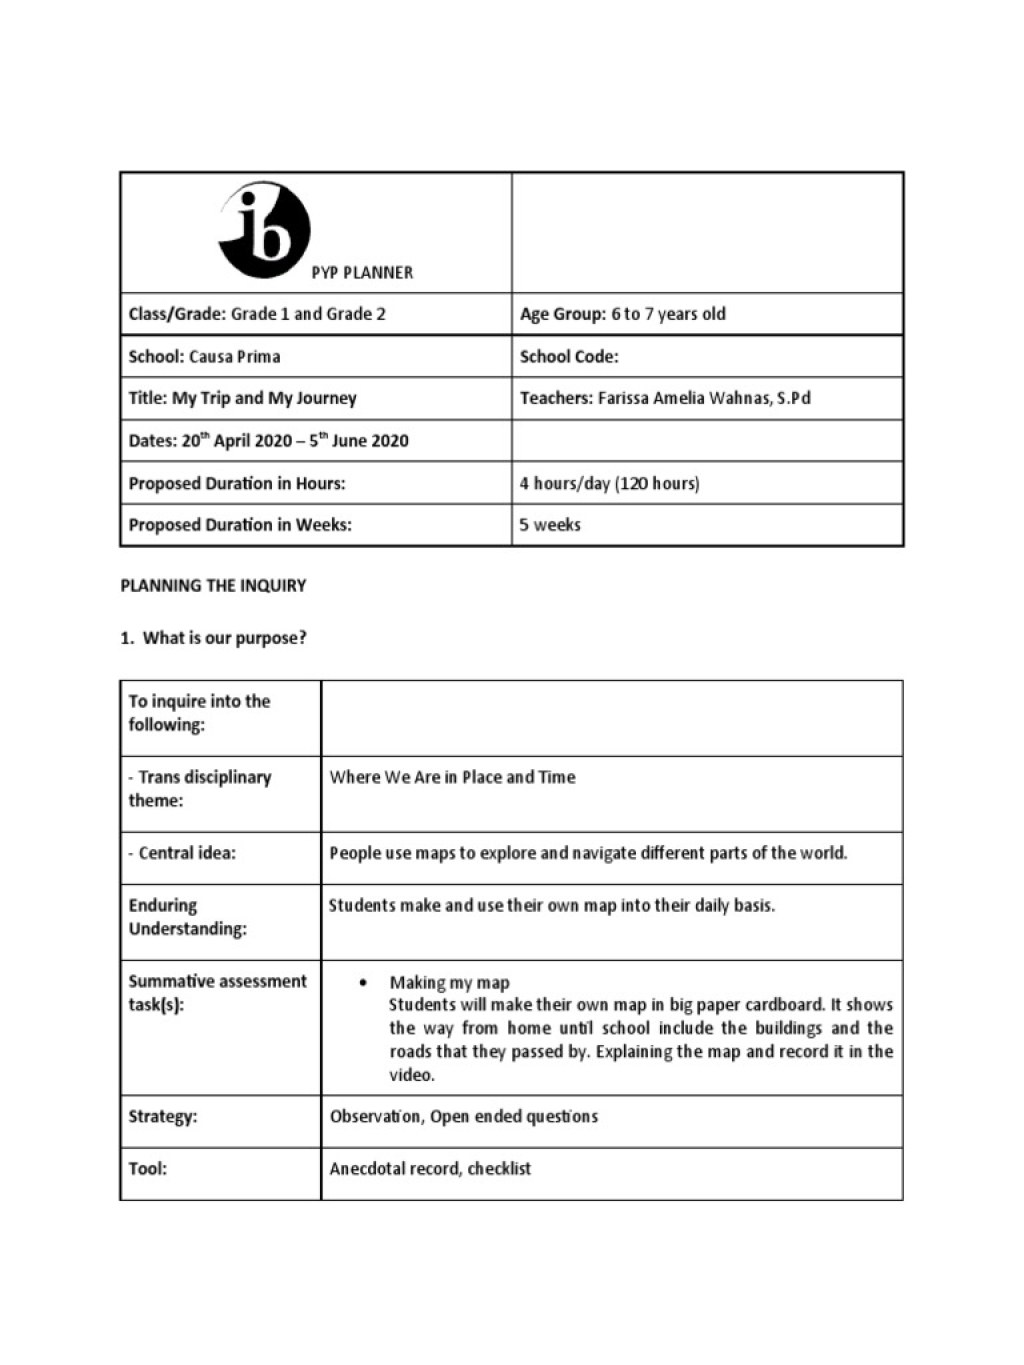 journey planning year 2 - PYP PLANNER (WHERE WE ARE IN PLACE AND TIME) THEME  (Grade